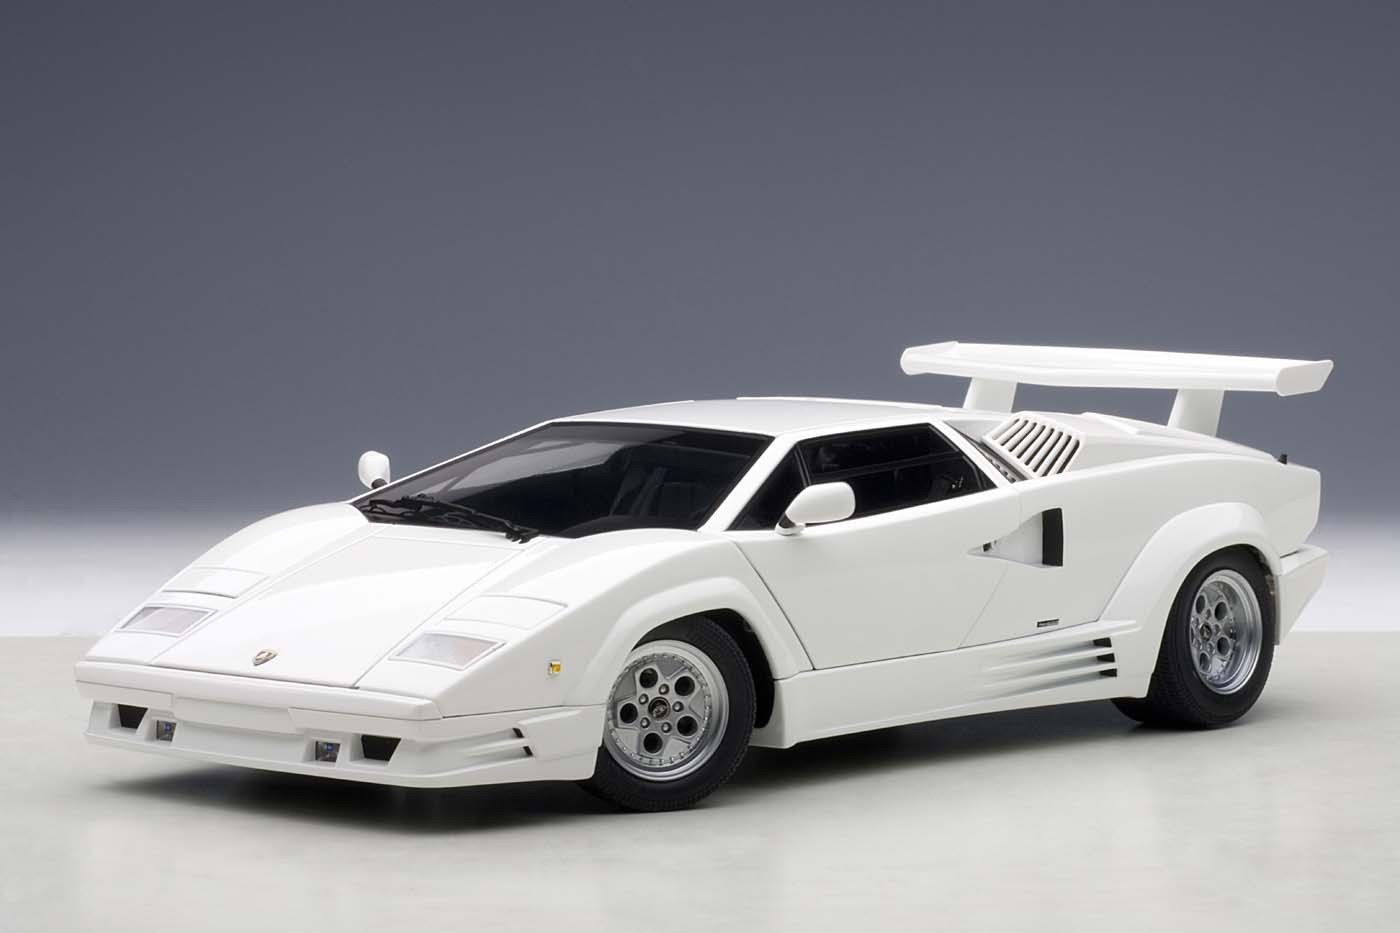 AUTOart Highly detailed die-cast model 25th Anniversary